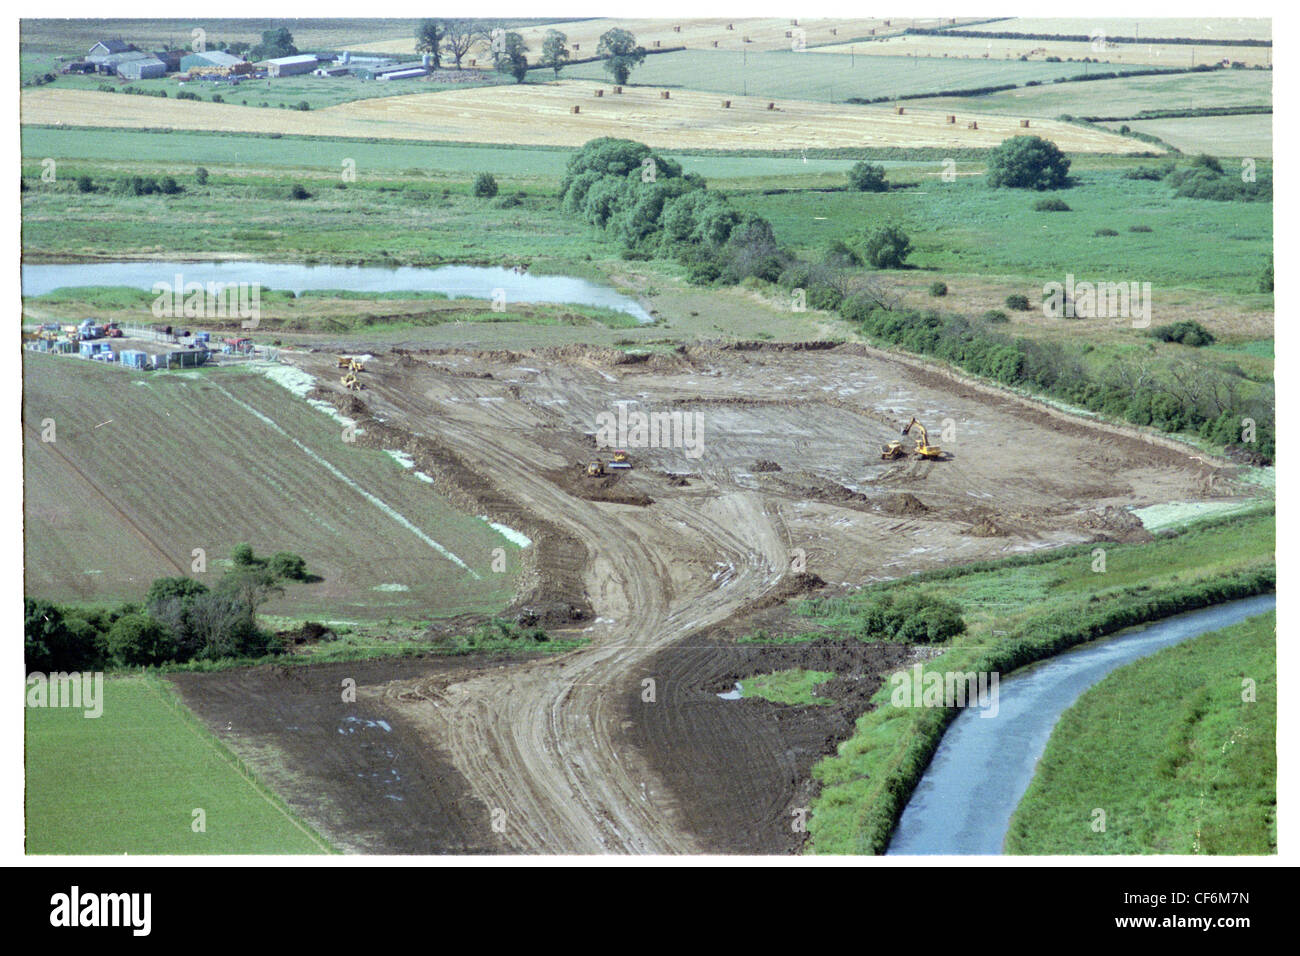 flood improvement scheme to the River Hull in east Yorkshire, showing clay borrow area being worked. Stock Photo